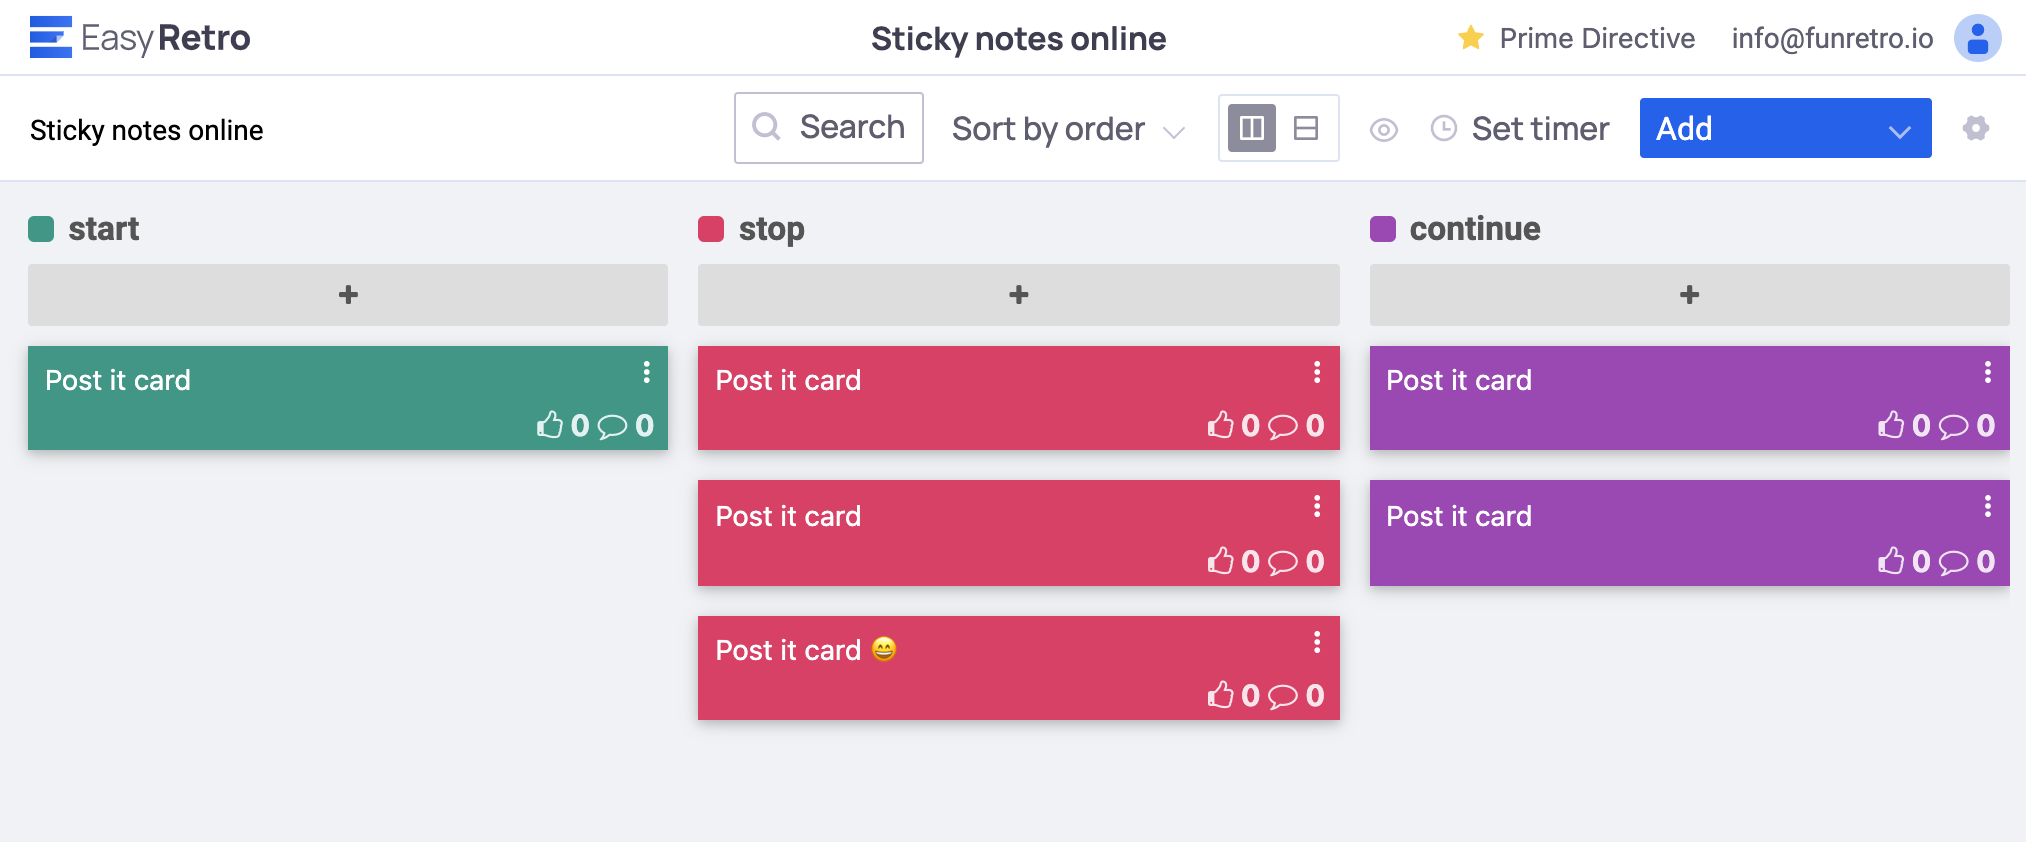 Screenshot of easyretro online sticky notes board